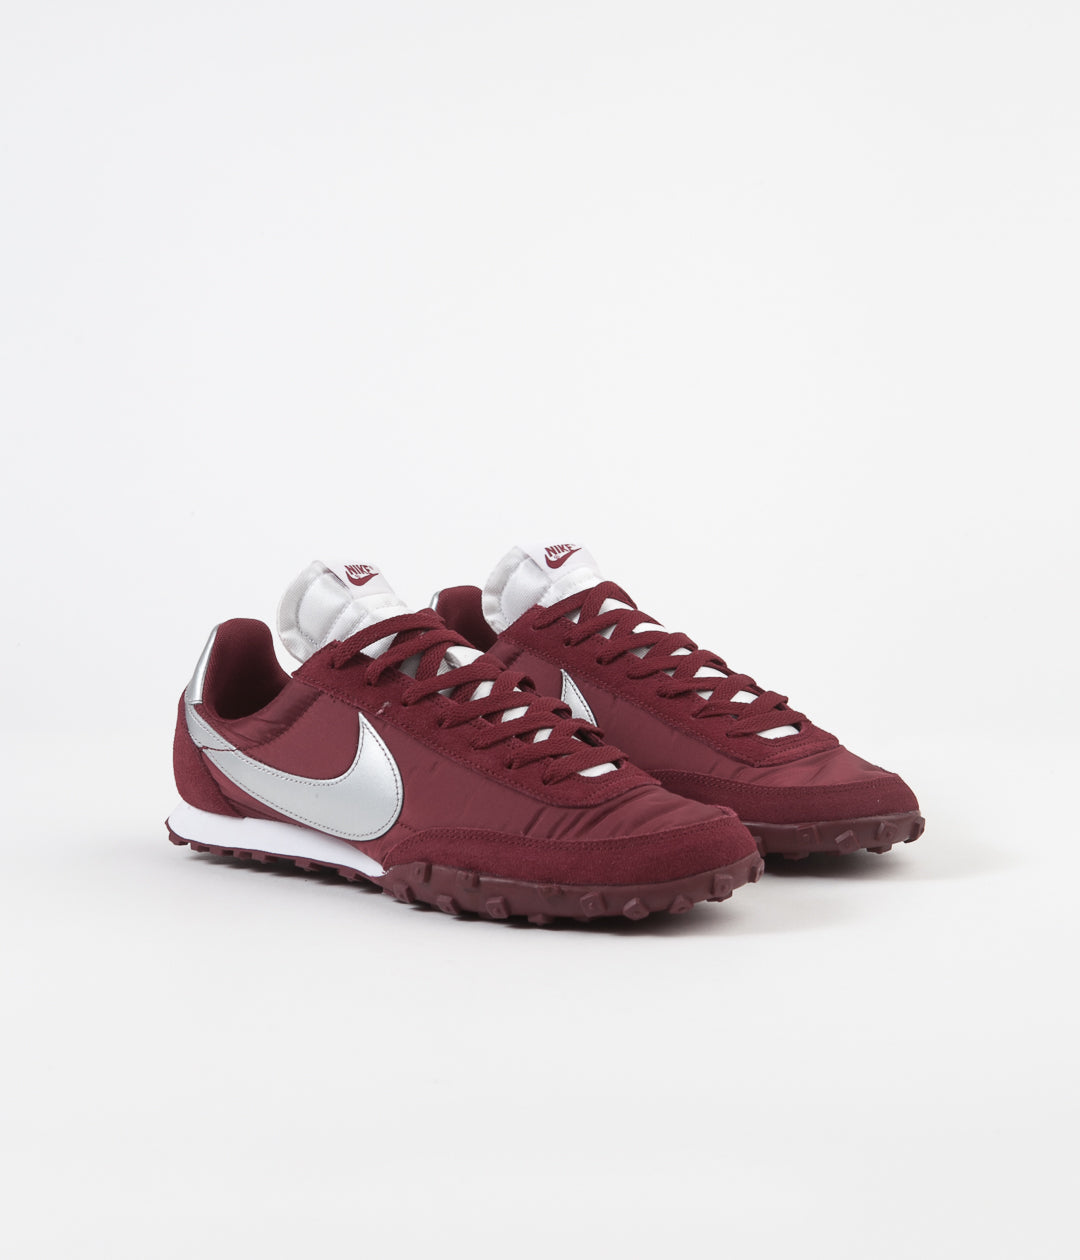 Nike Waffle Racer Team Red